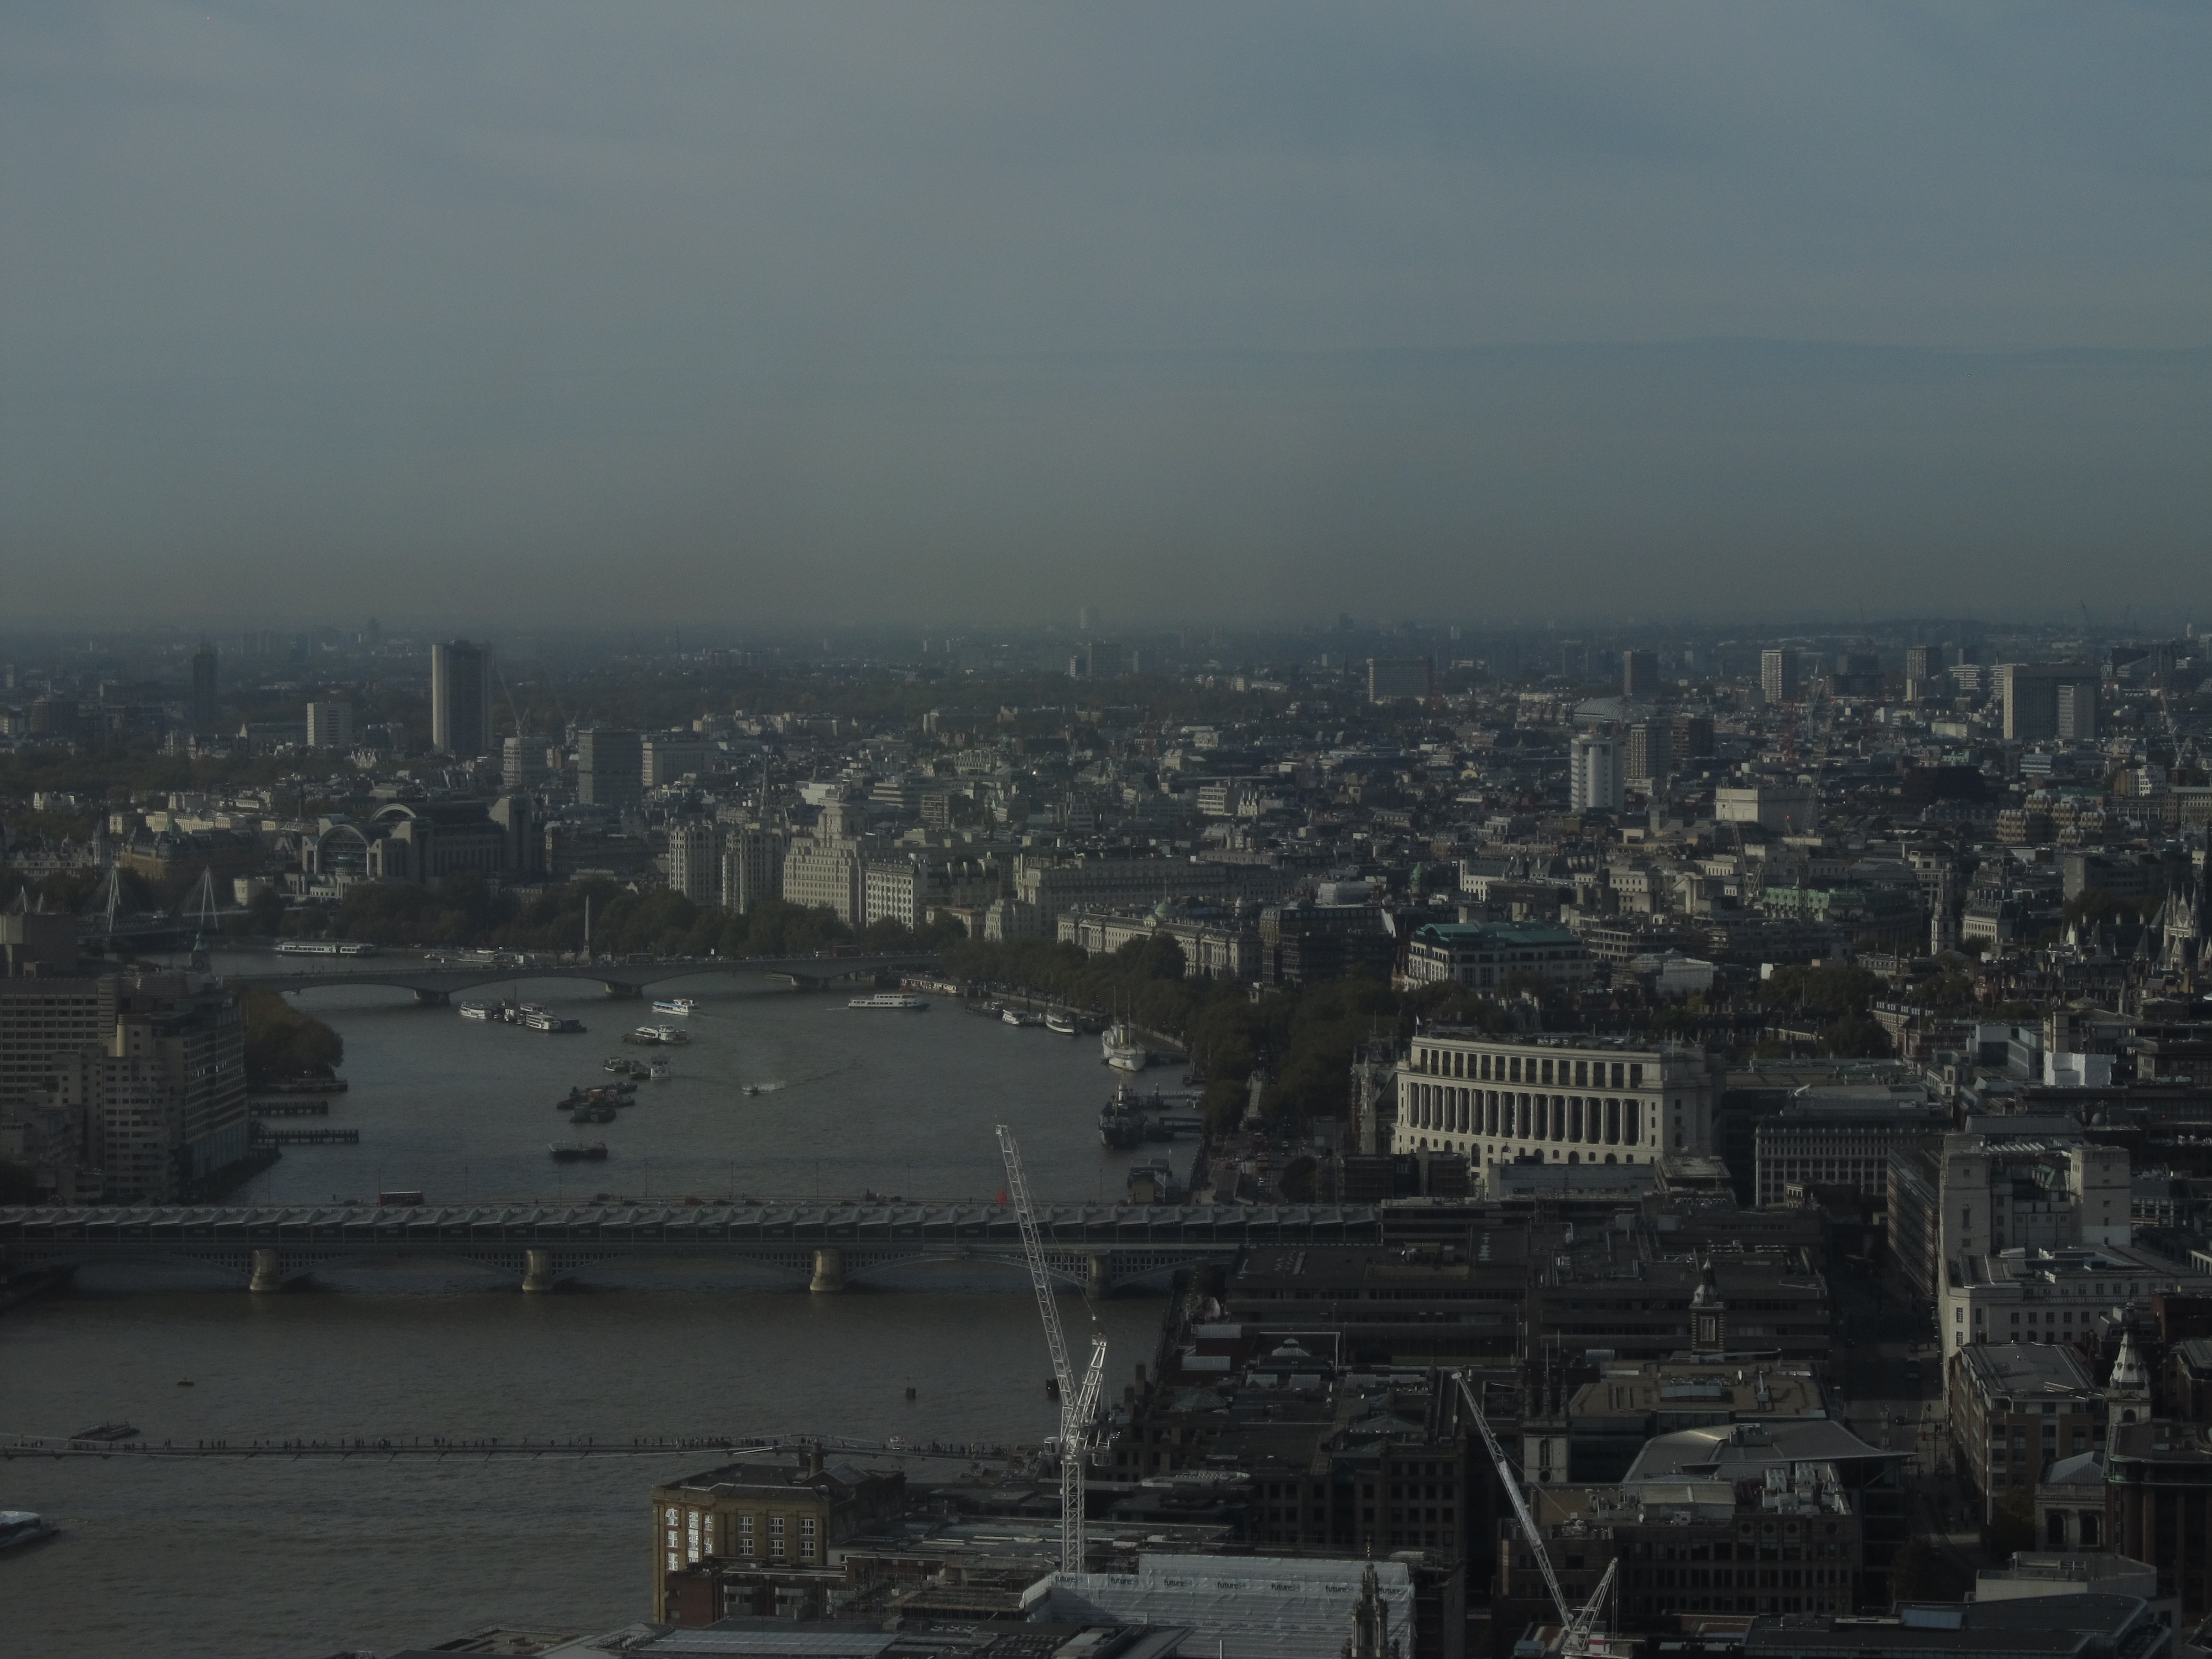 London Hilton Building and HyDe Park seen from the Walkie Talkie Sky Garden